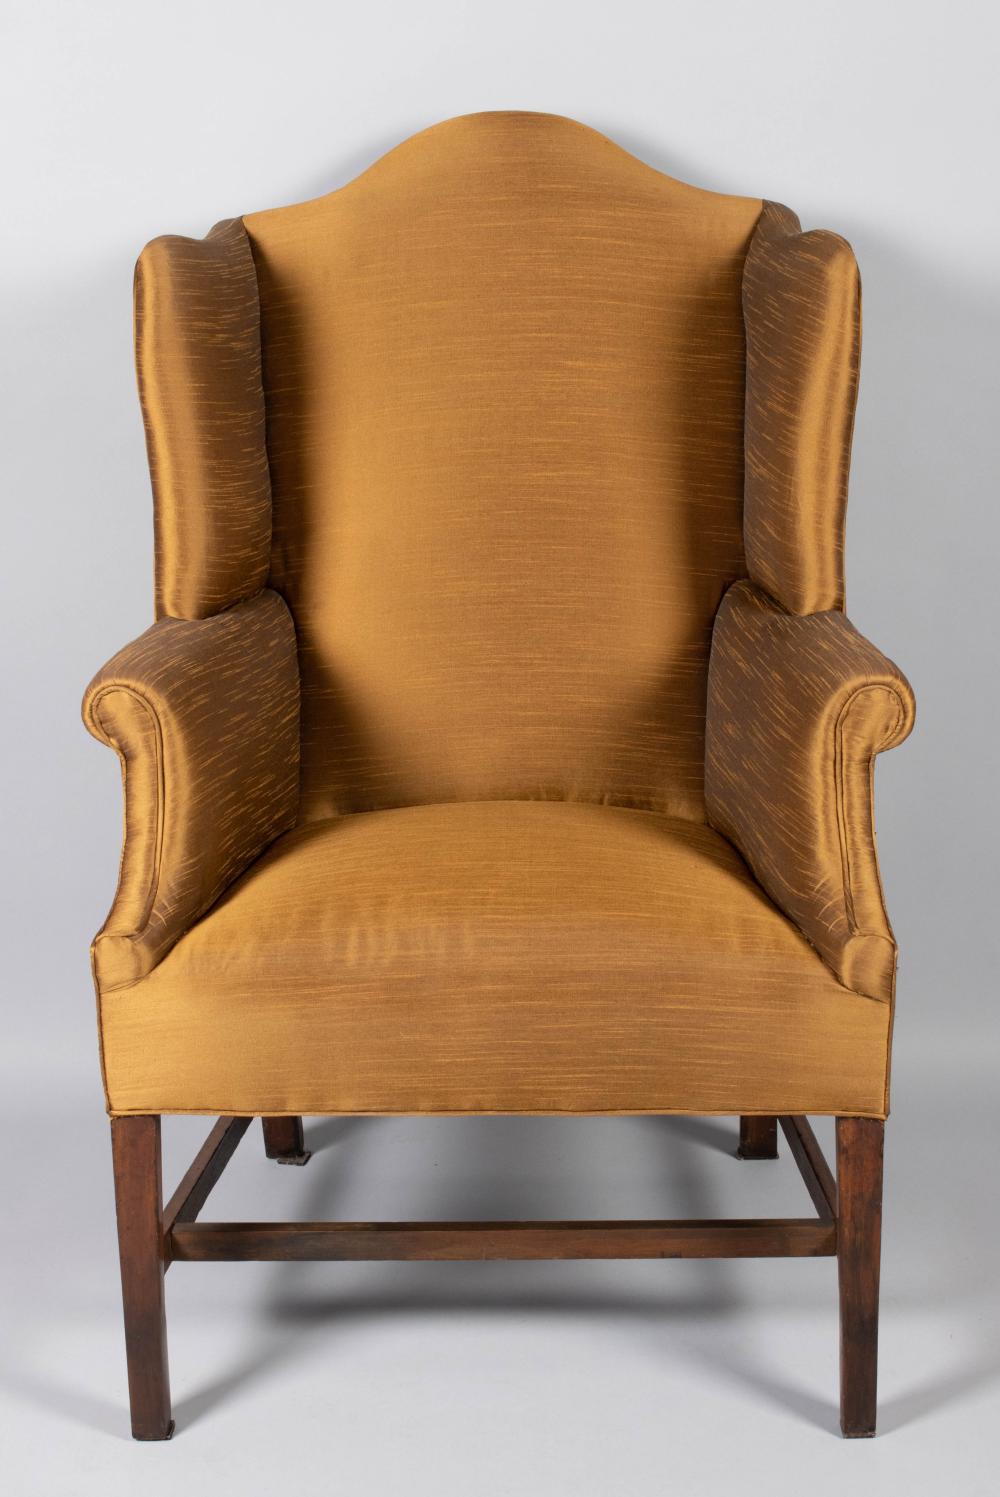 CHIPPENDALE/GEORGE III UPHOLSTERED